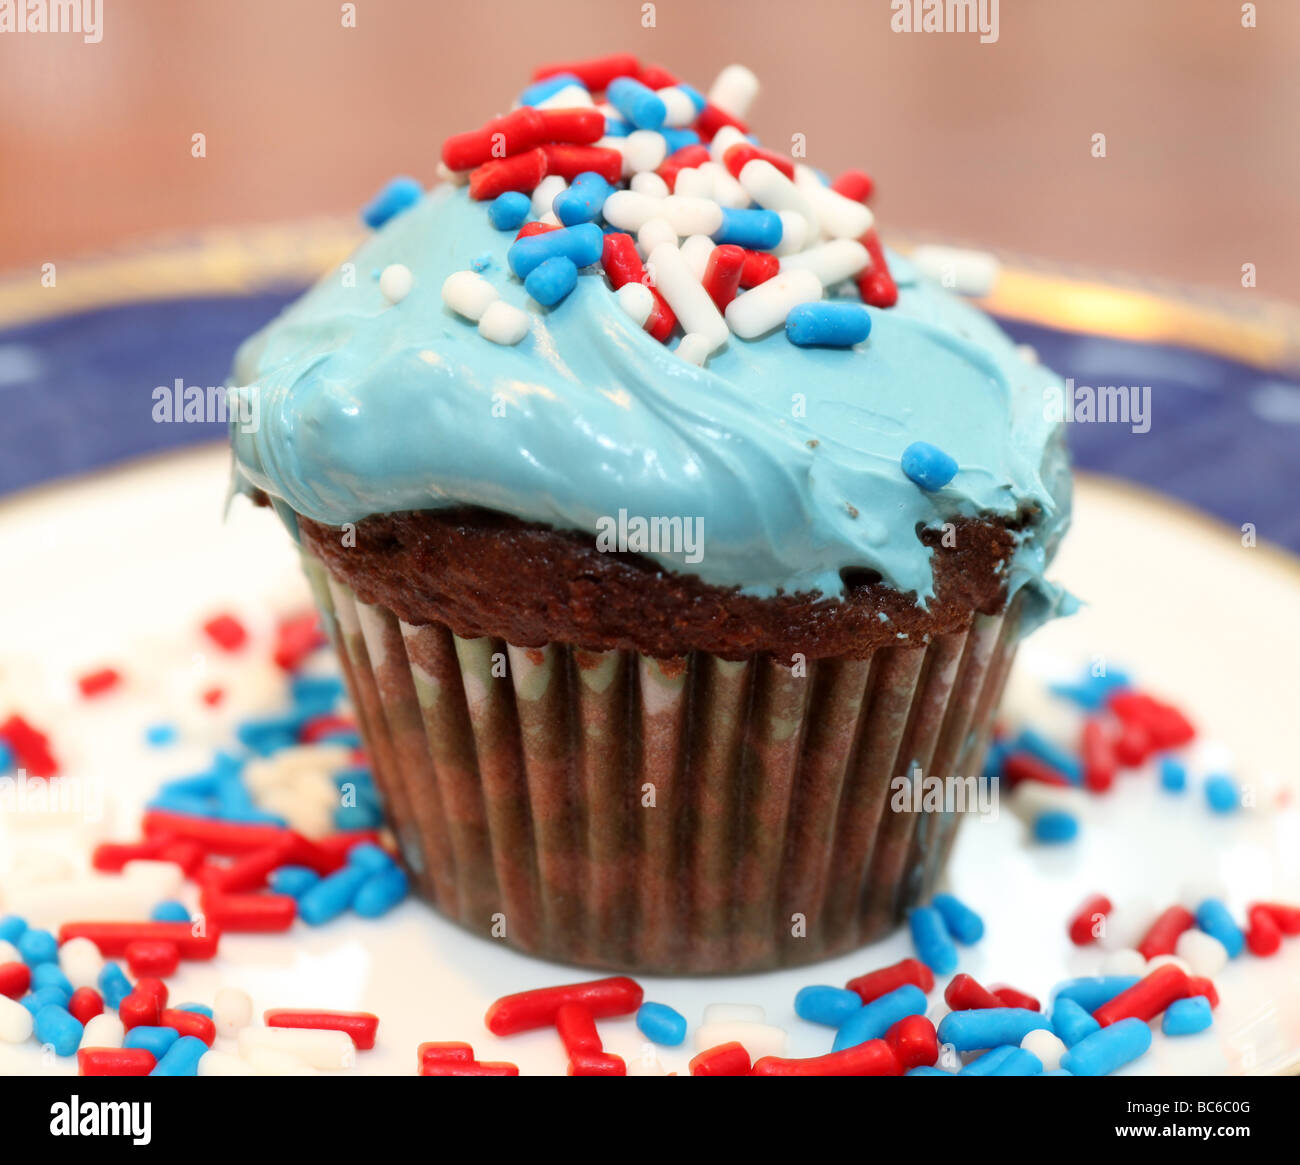 Blue frosted chocolate cupcake, decorated with red, white, and blue sprinkles, placed on royal blue Wedgewood china plate Stock Photo